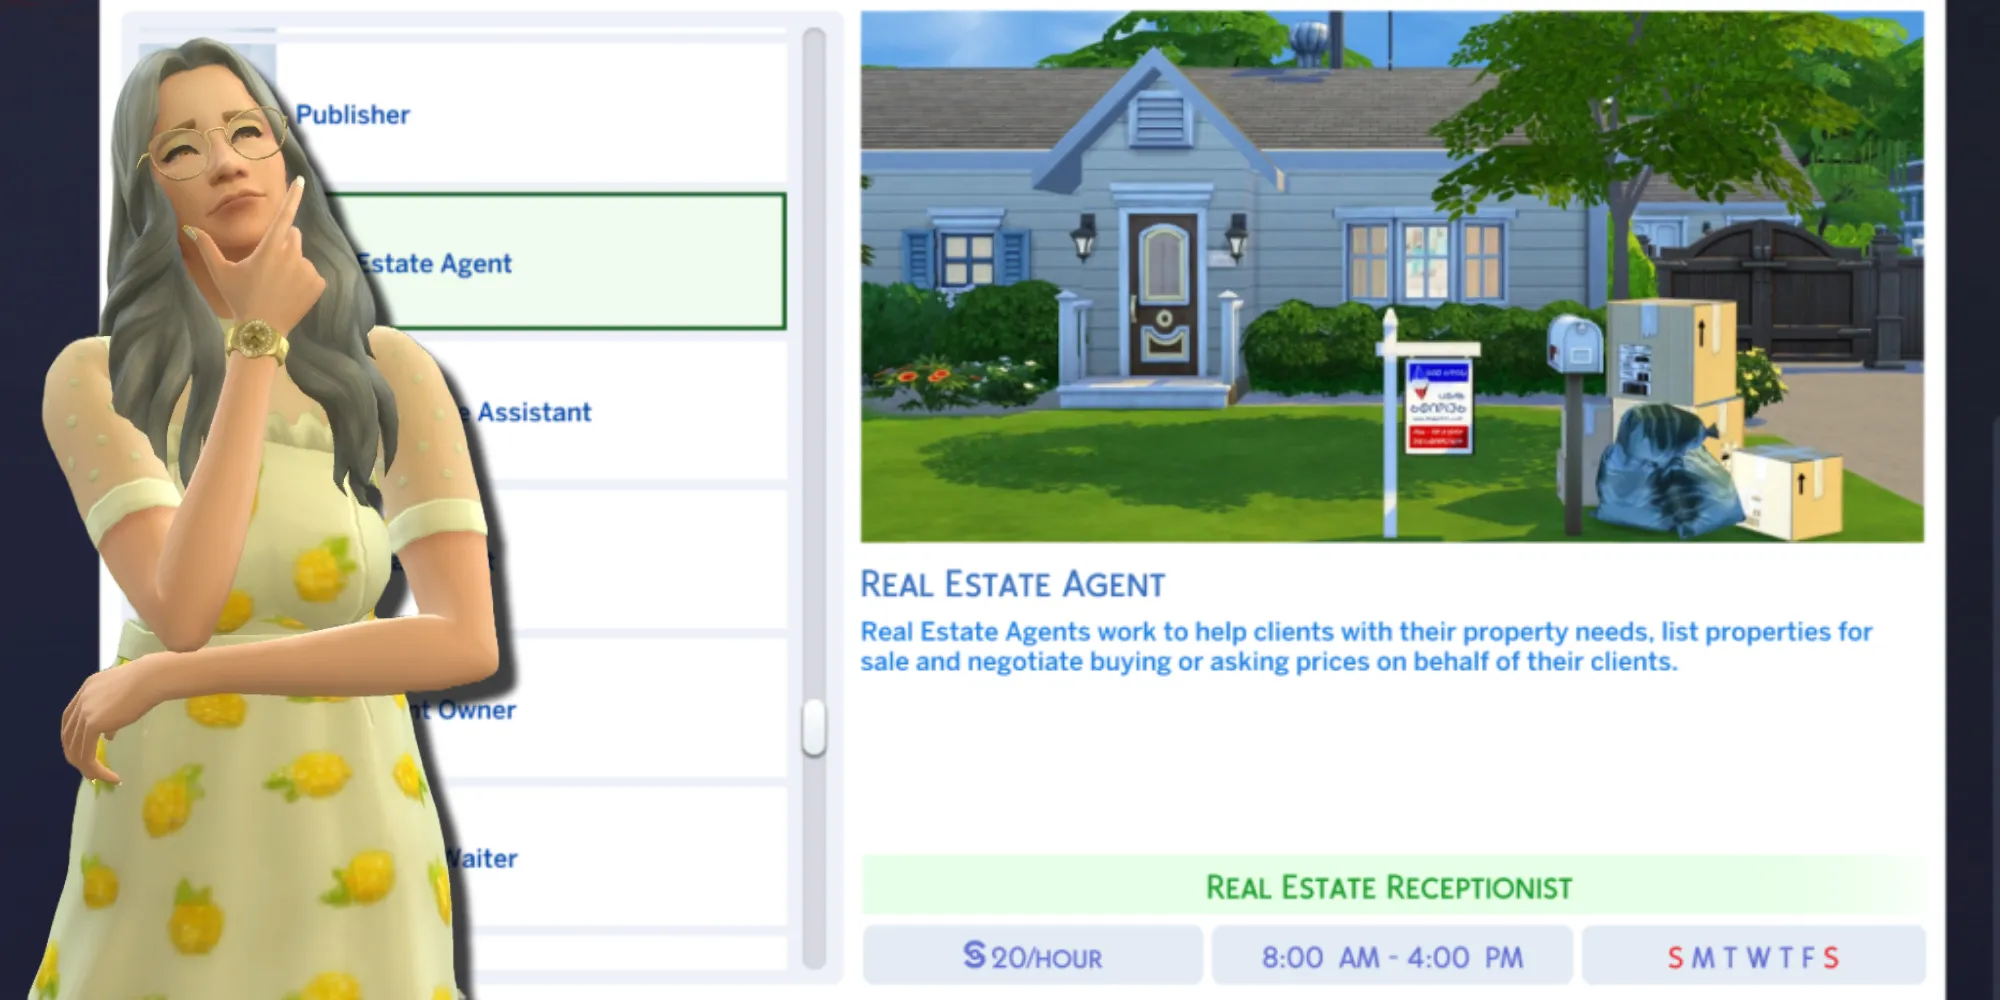 The job description for the Real Estate Career Mod for The Sims 4 and a Sim considering joining the career as a receptionist